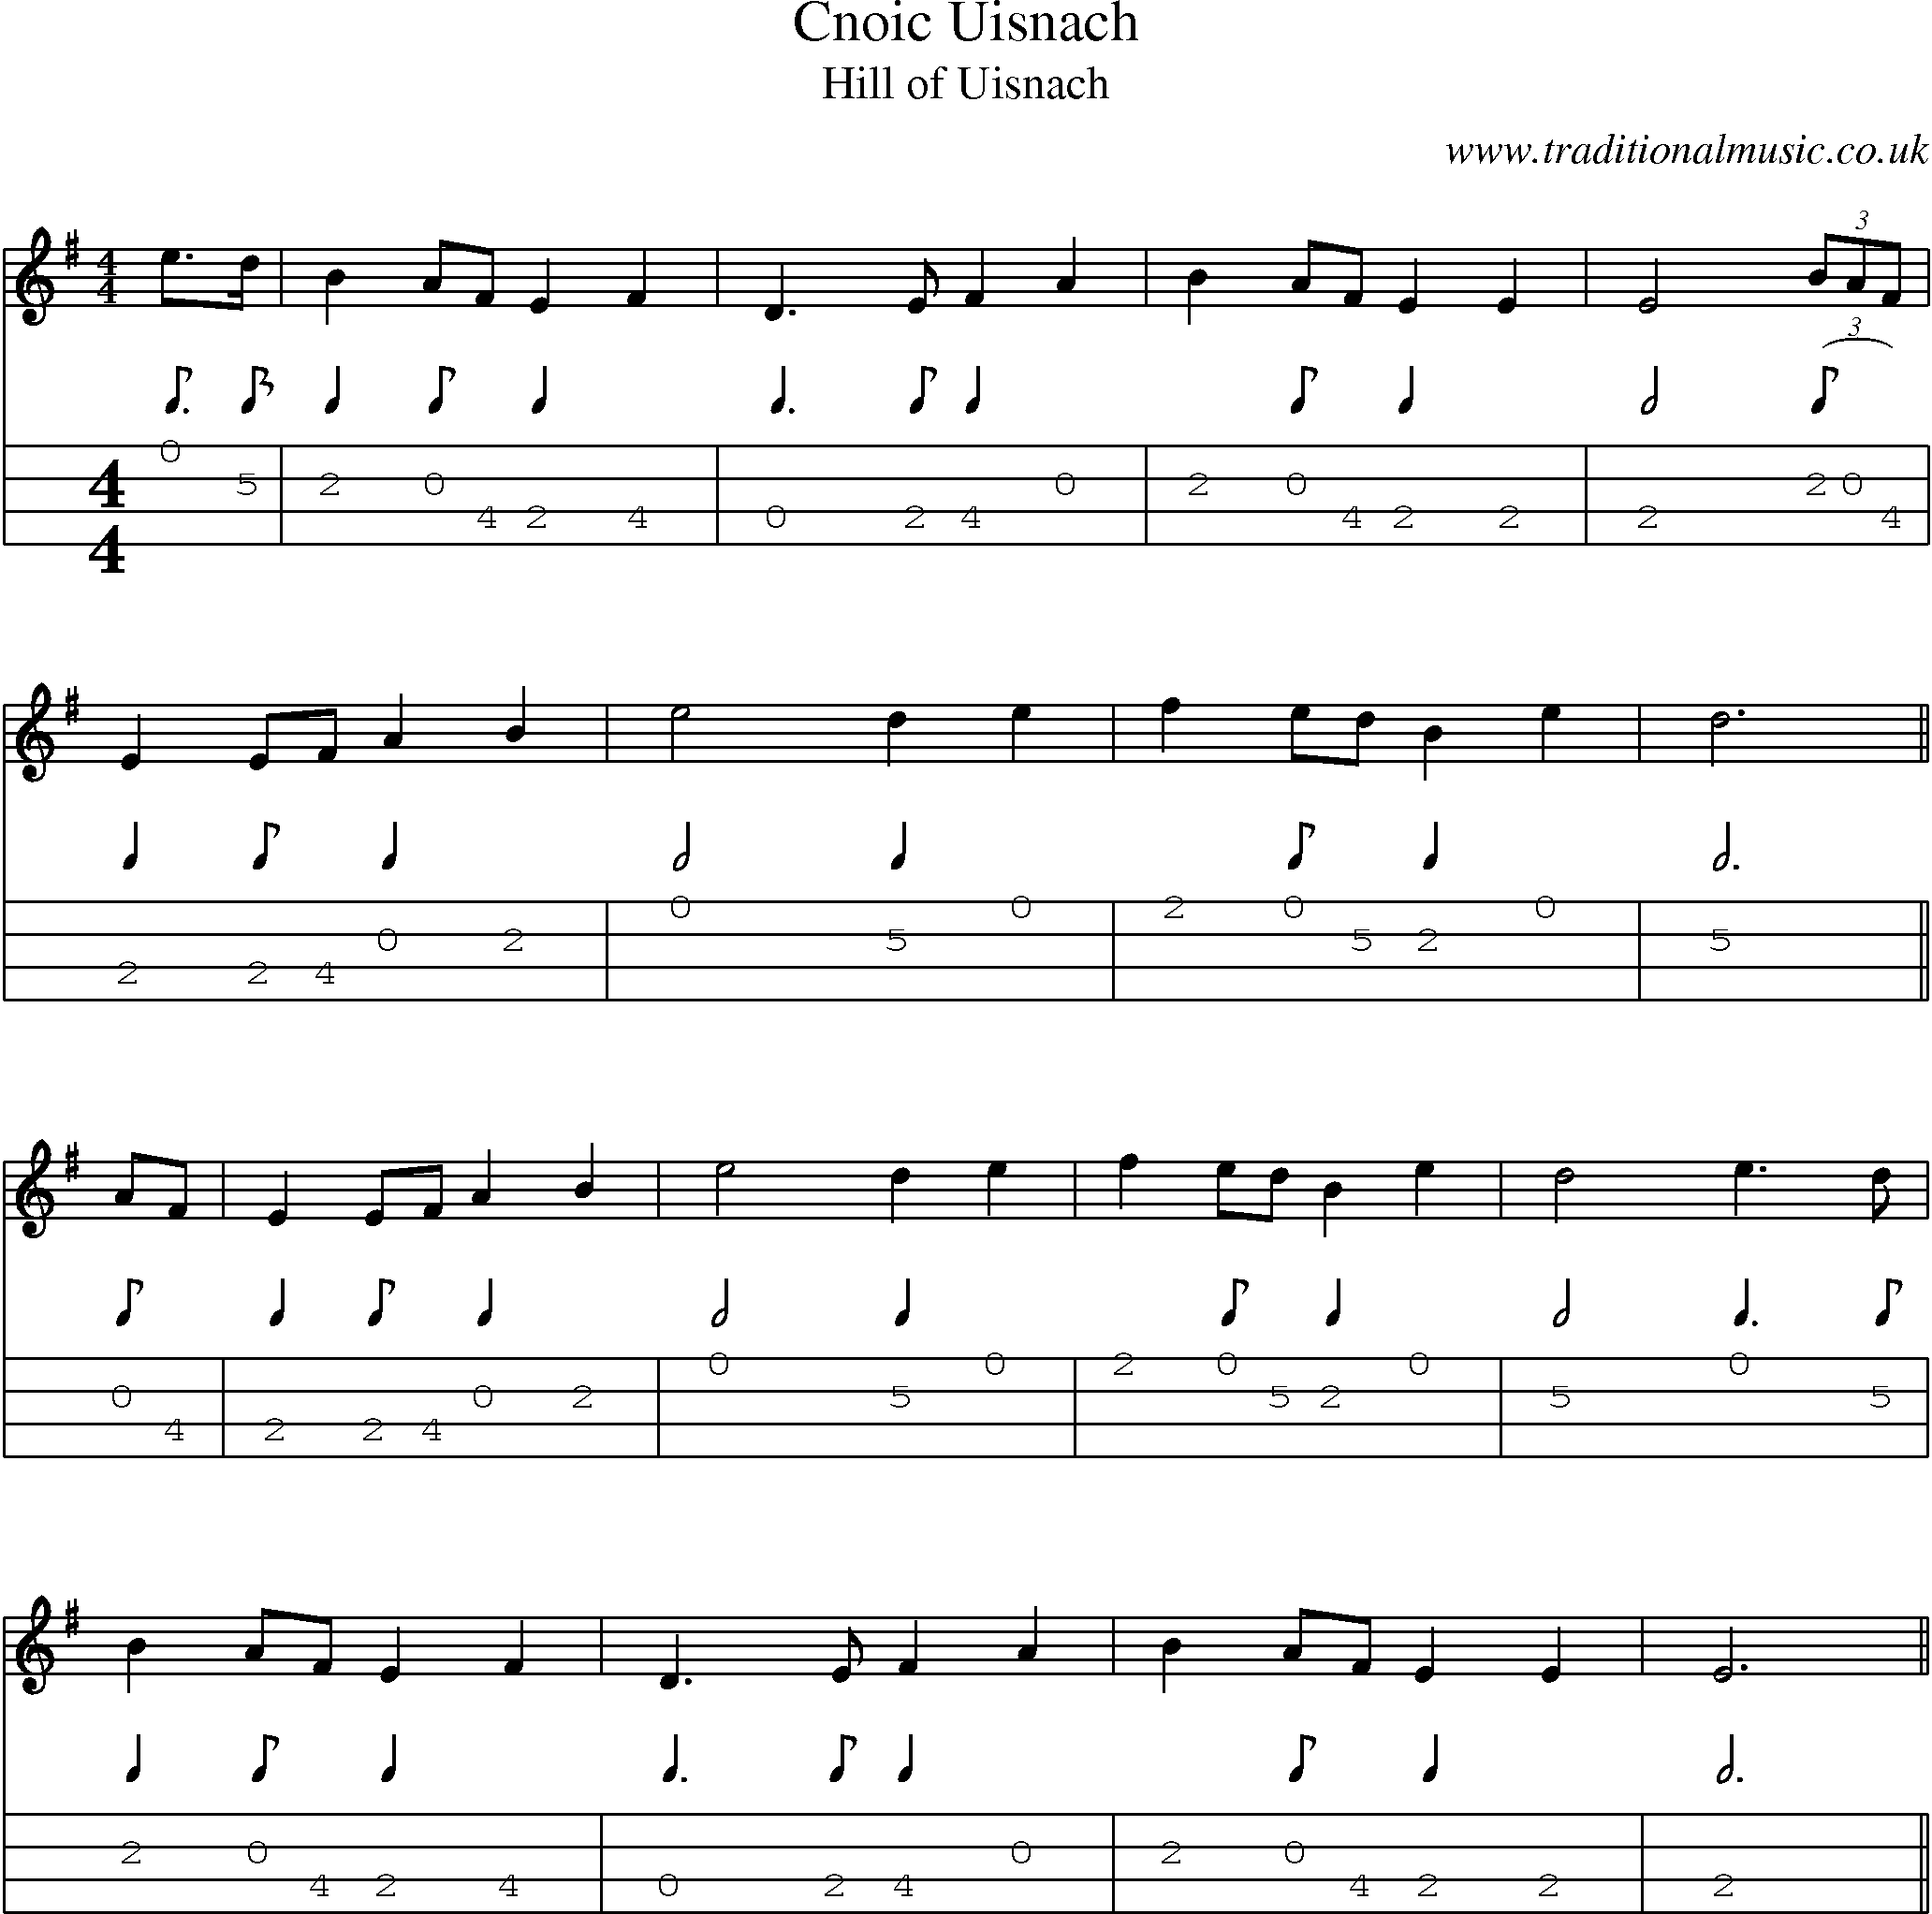 Music Score and Mandolin Tabs for Cnoic Uisnach